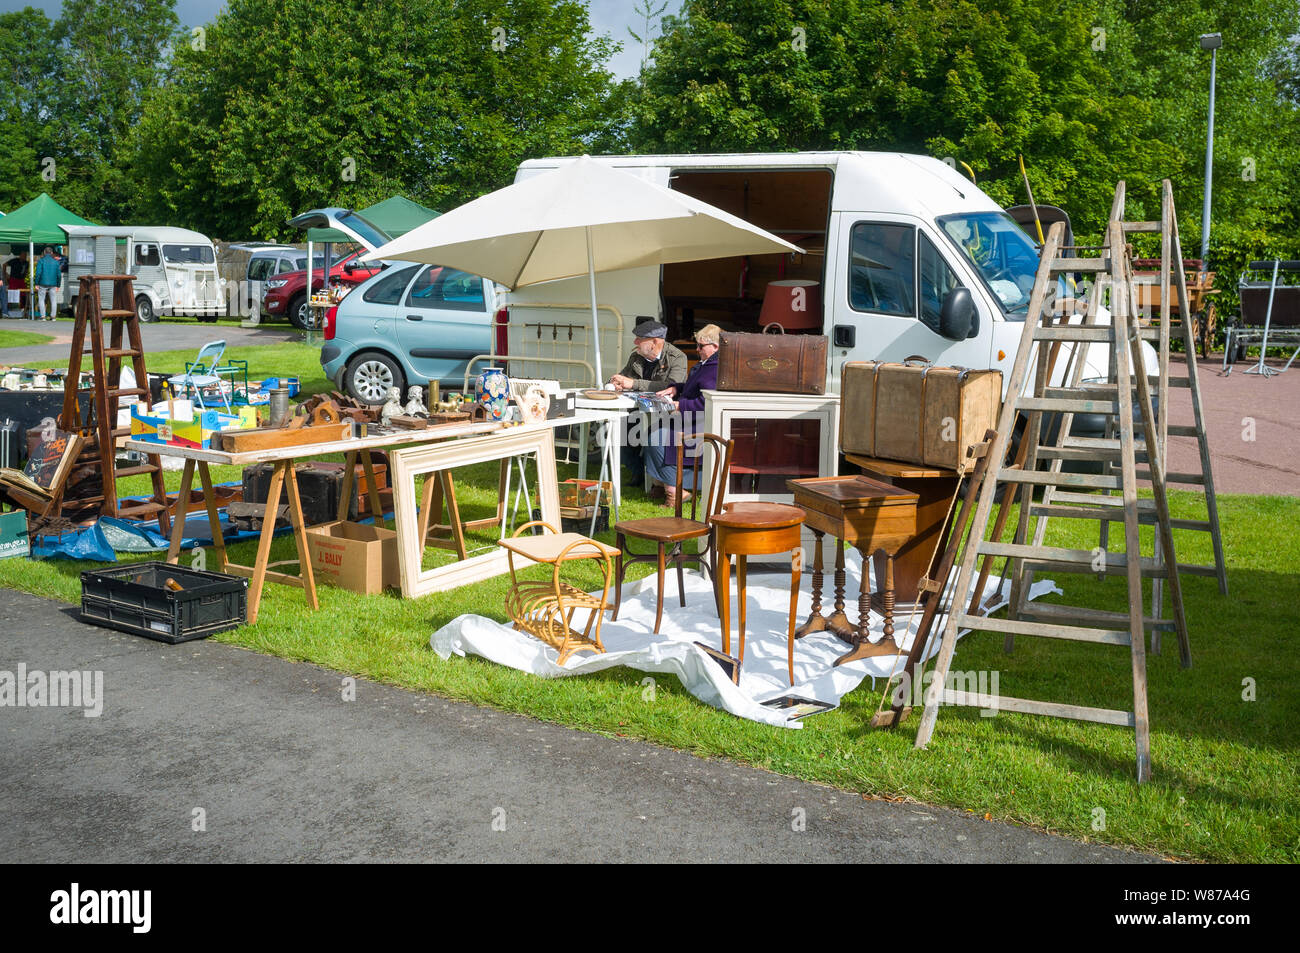 Furniture for sale at a traditional village fair or Foire a Tout in Normandy, France Stock Photo